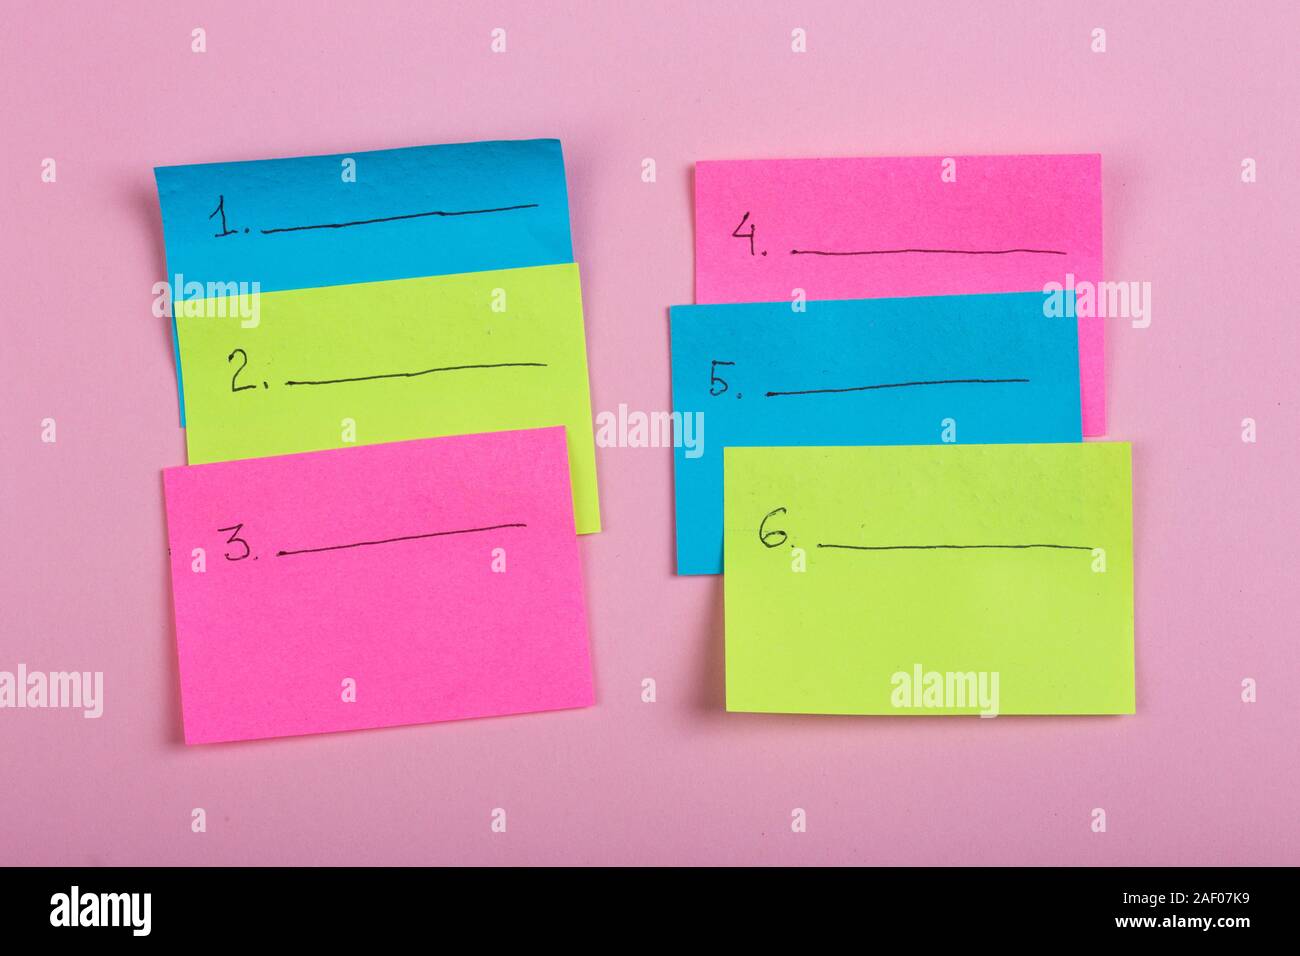 Plan of the week on colored blank stickers on pink background Stock Photo